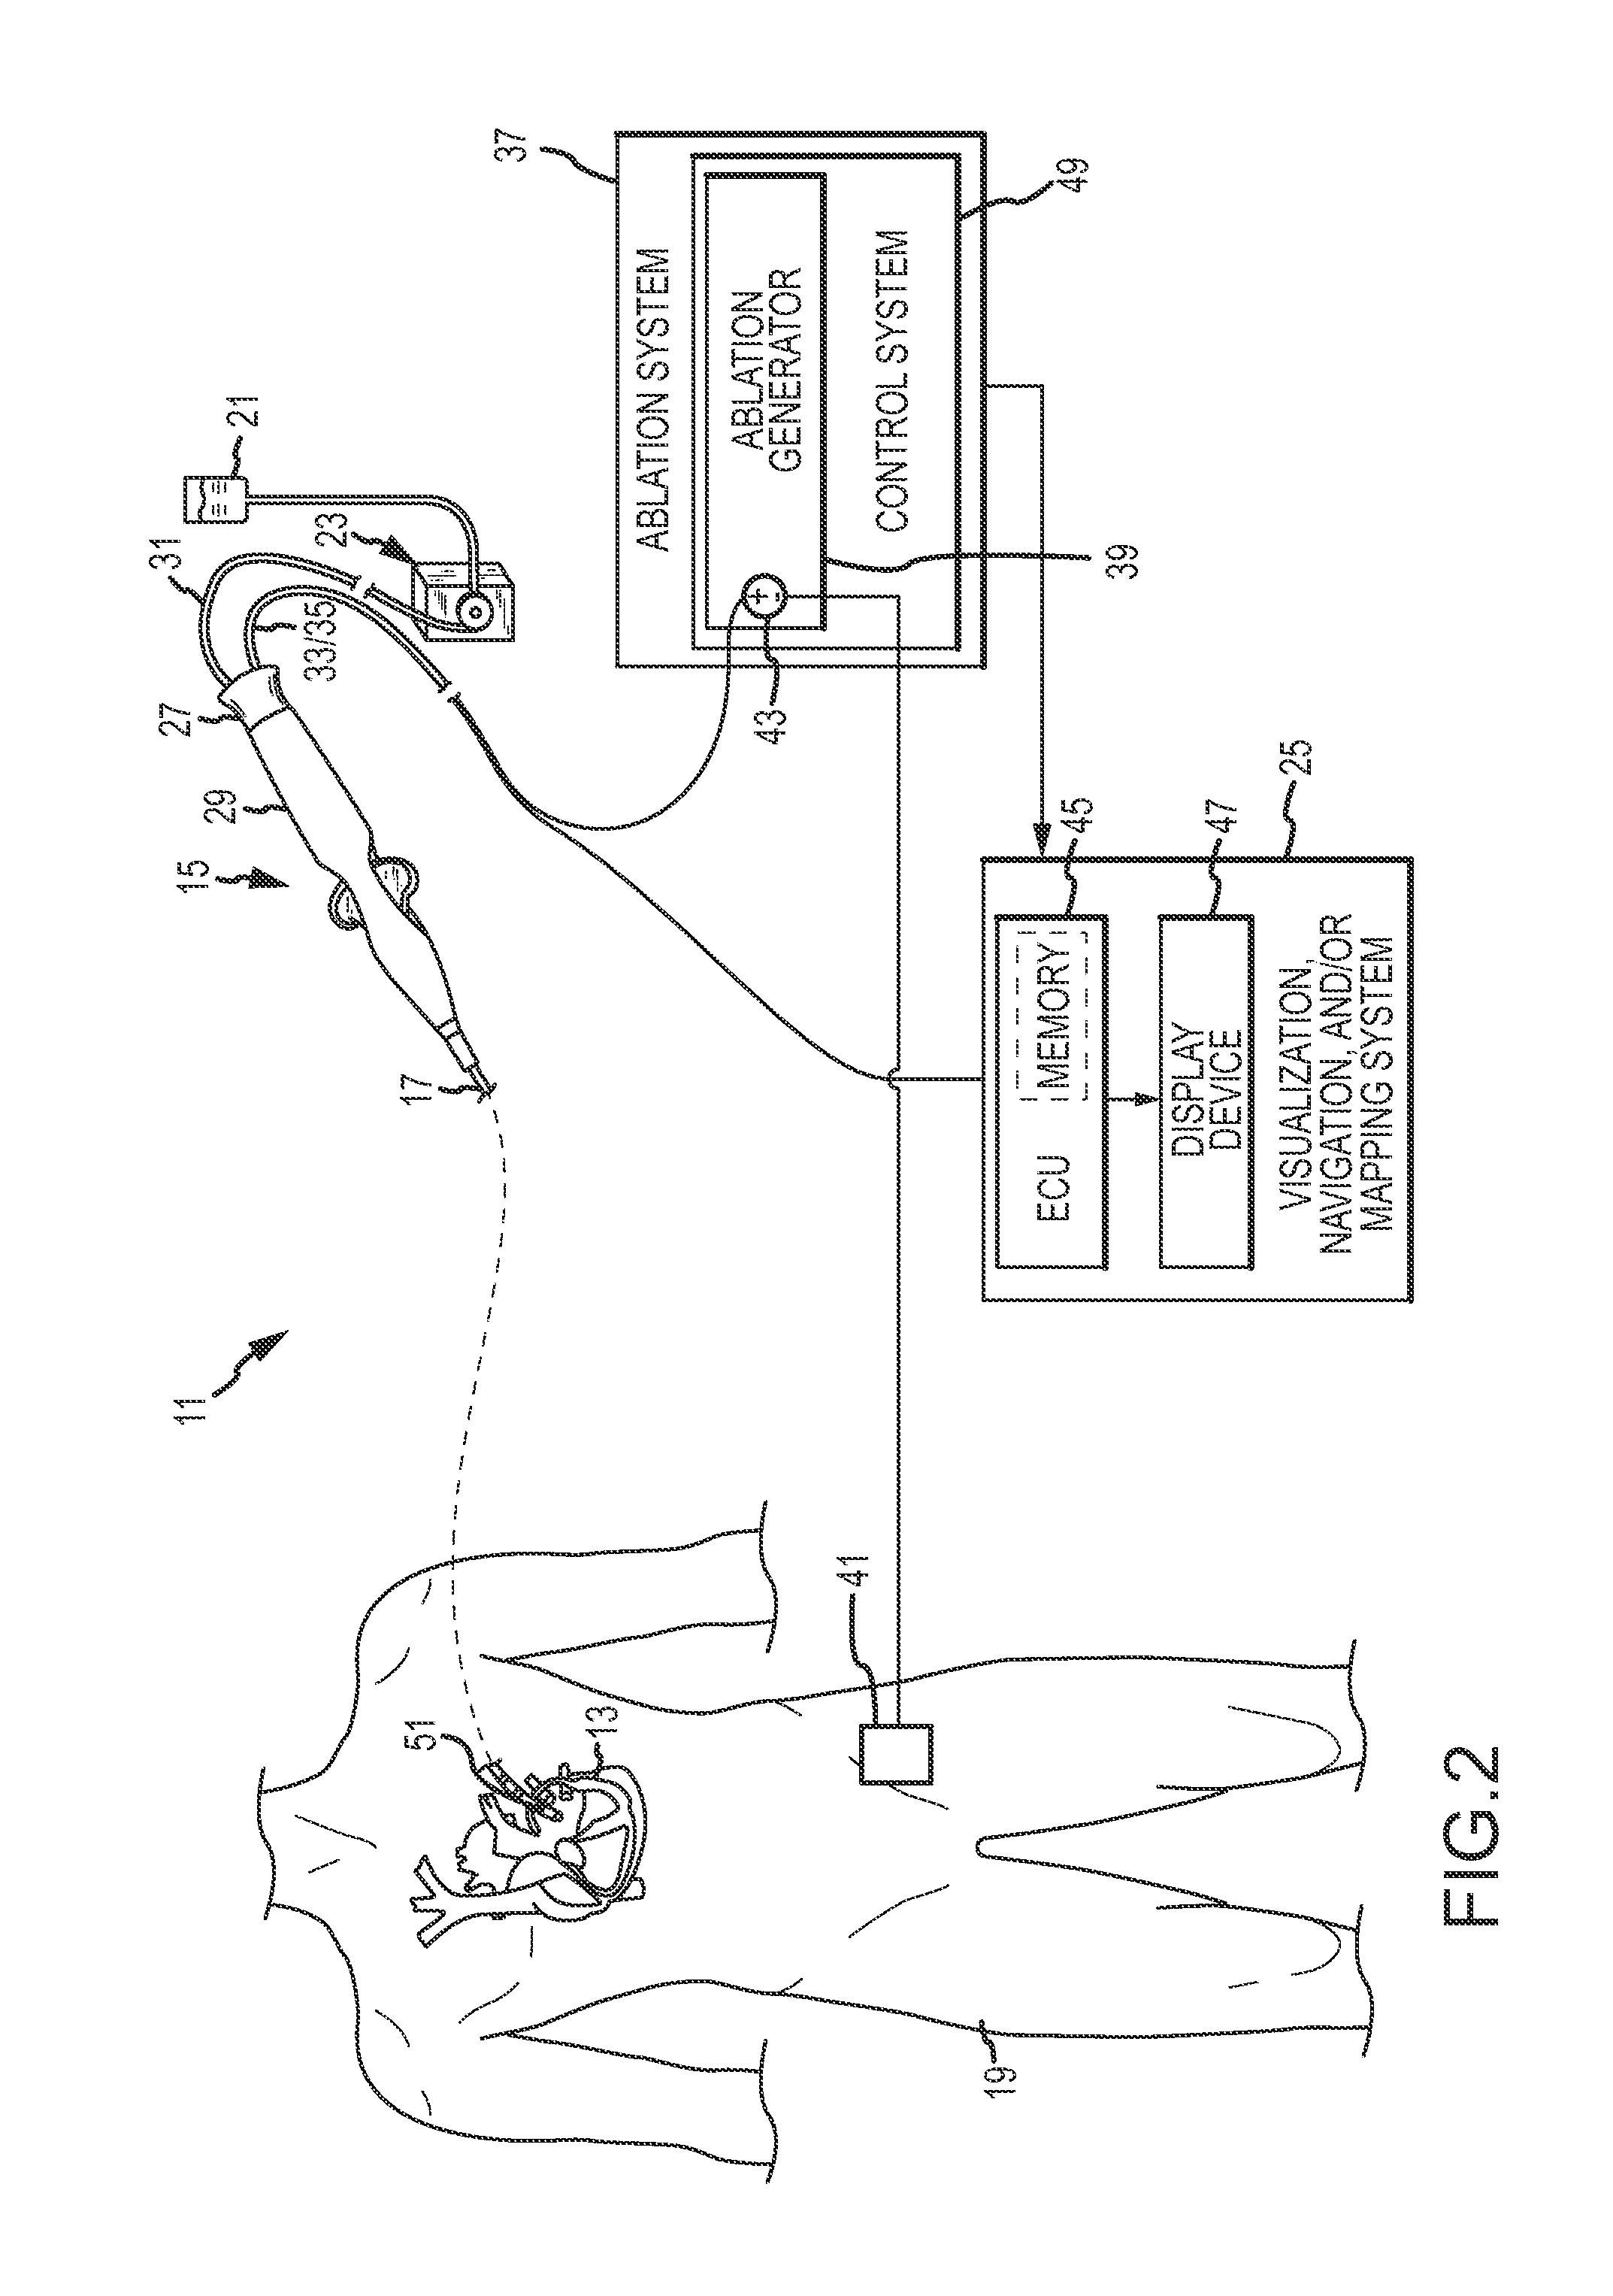 Multi-rate fluid flow and variable power deliverty for ablation electrode assemblies used in catheter ablation procedures